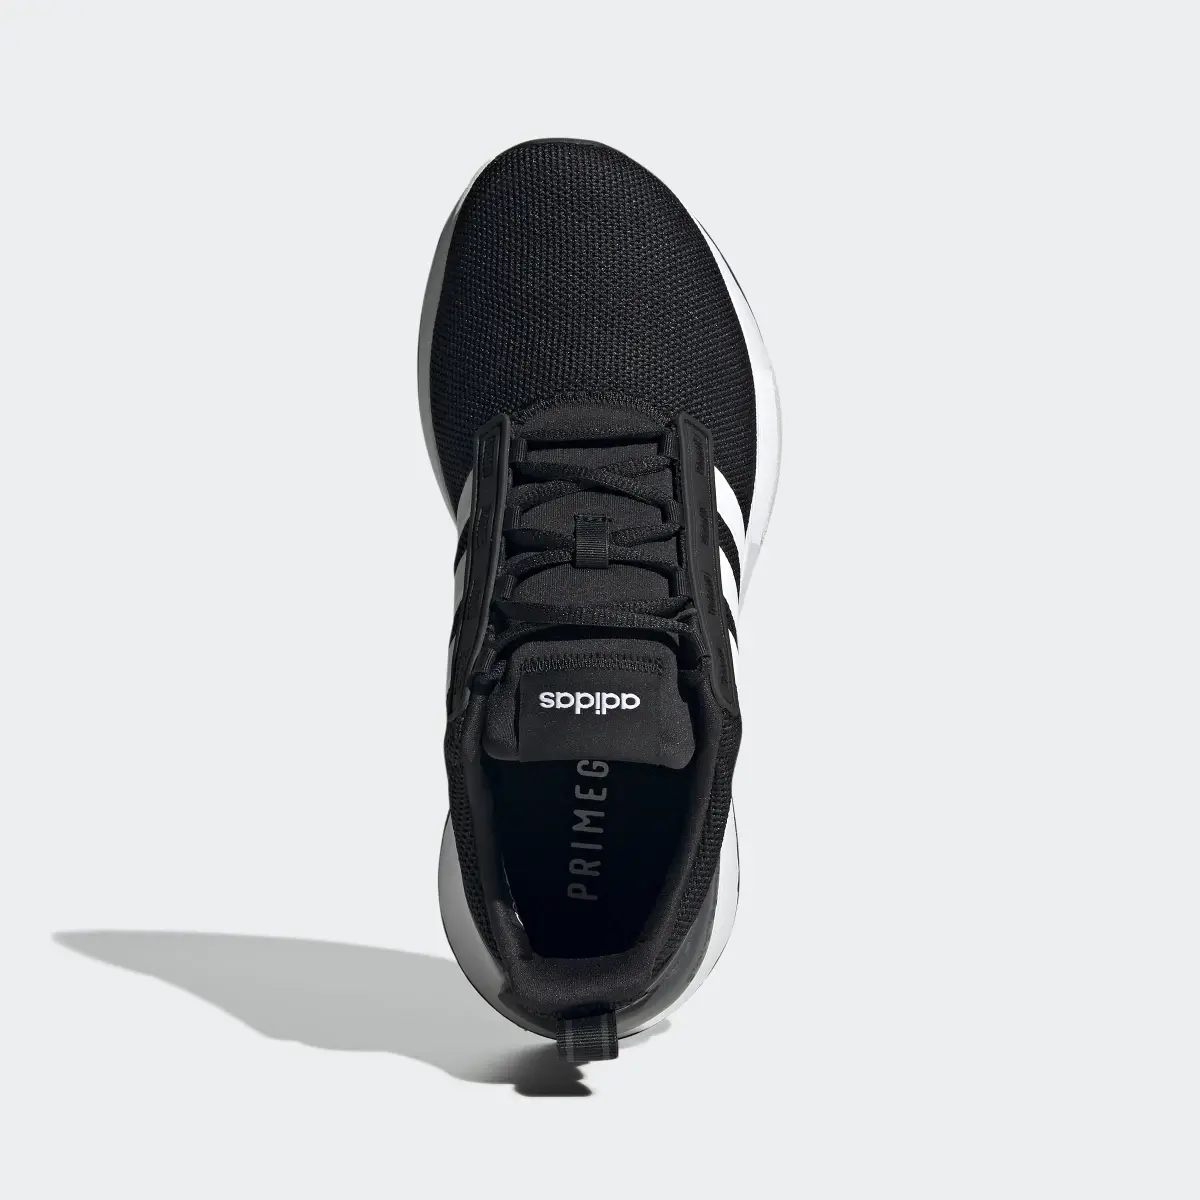 Adidas Racer TR21 Wide Shoes. 3